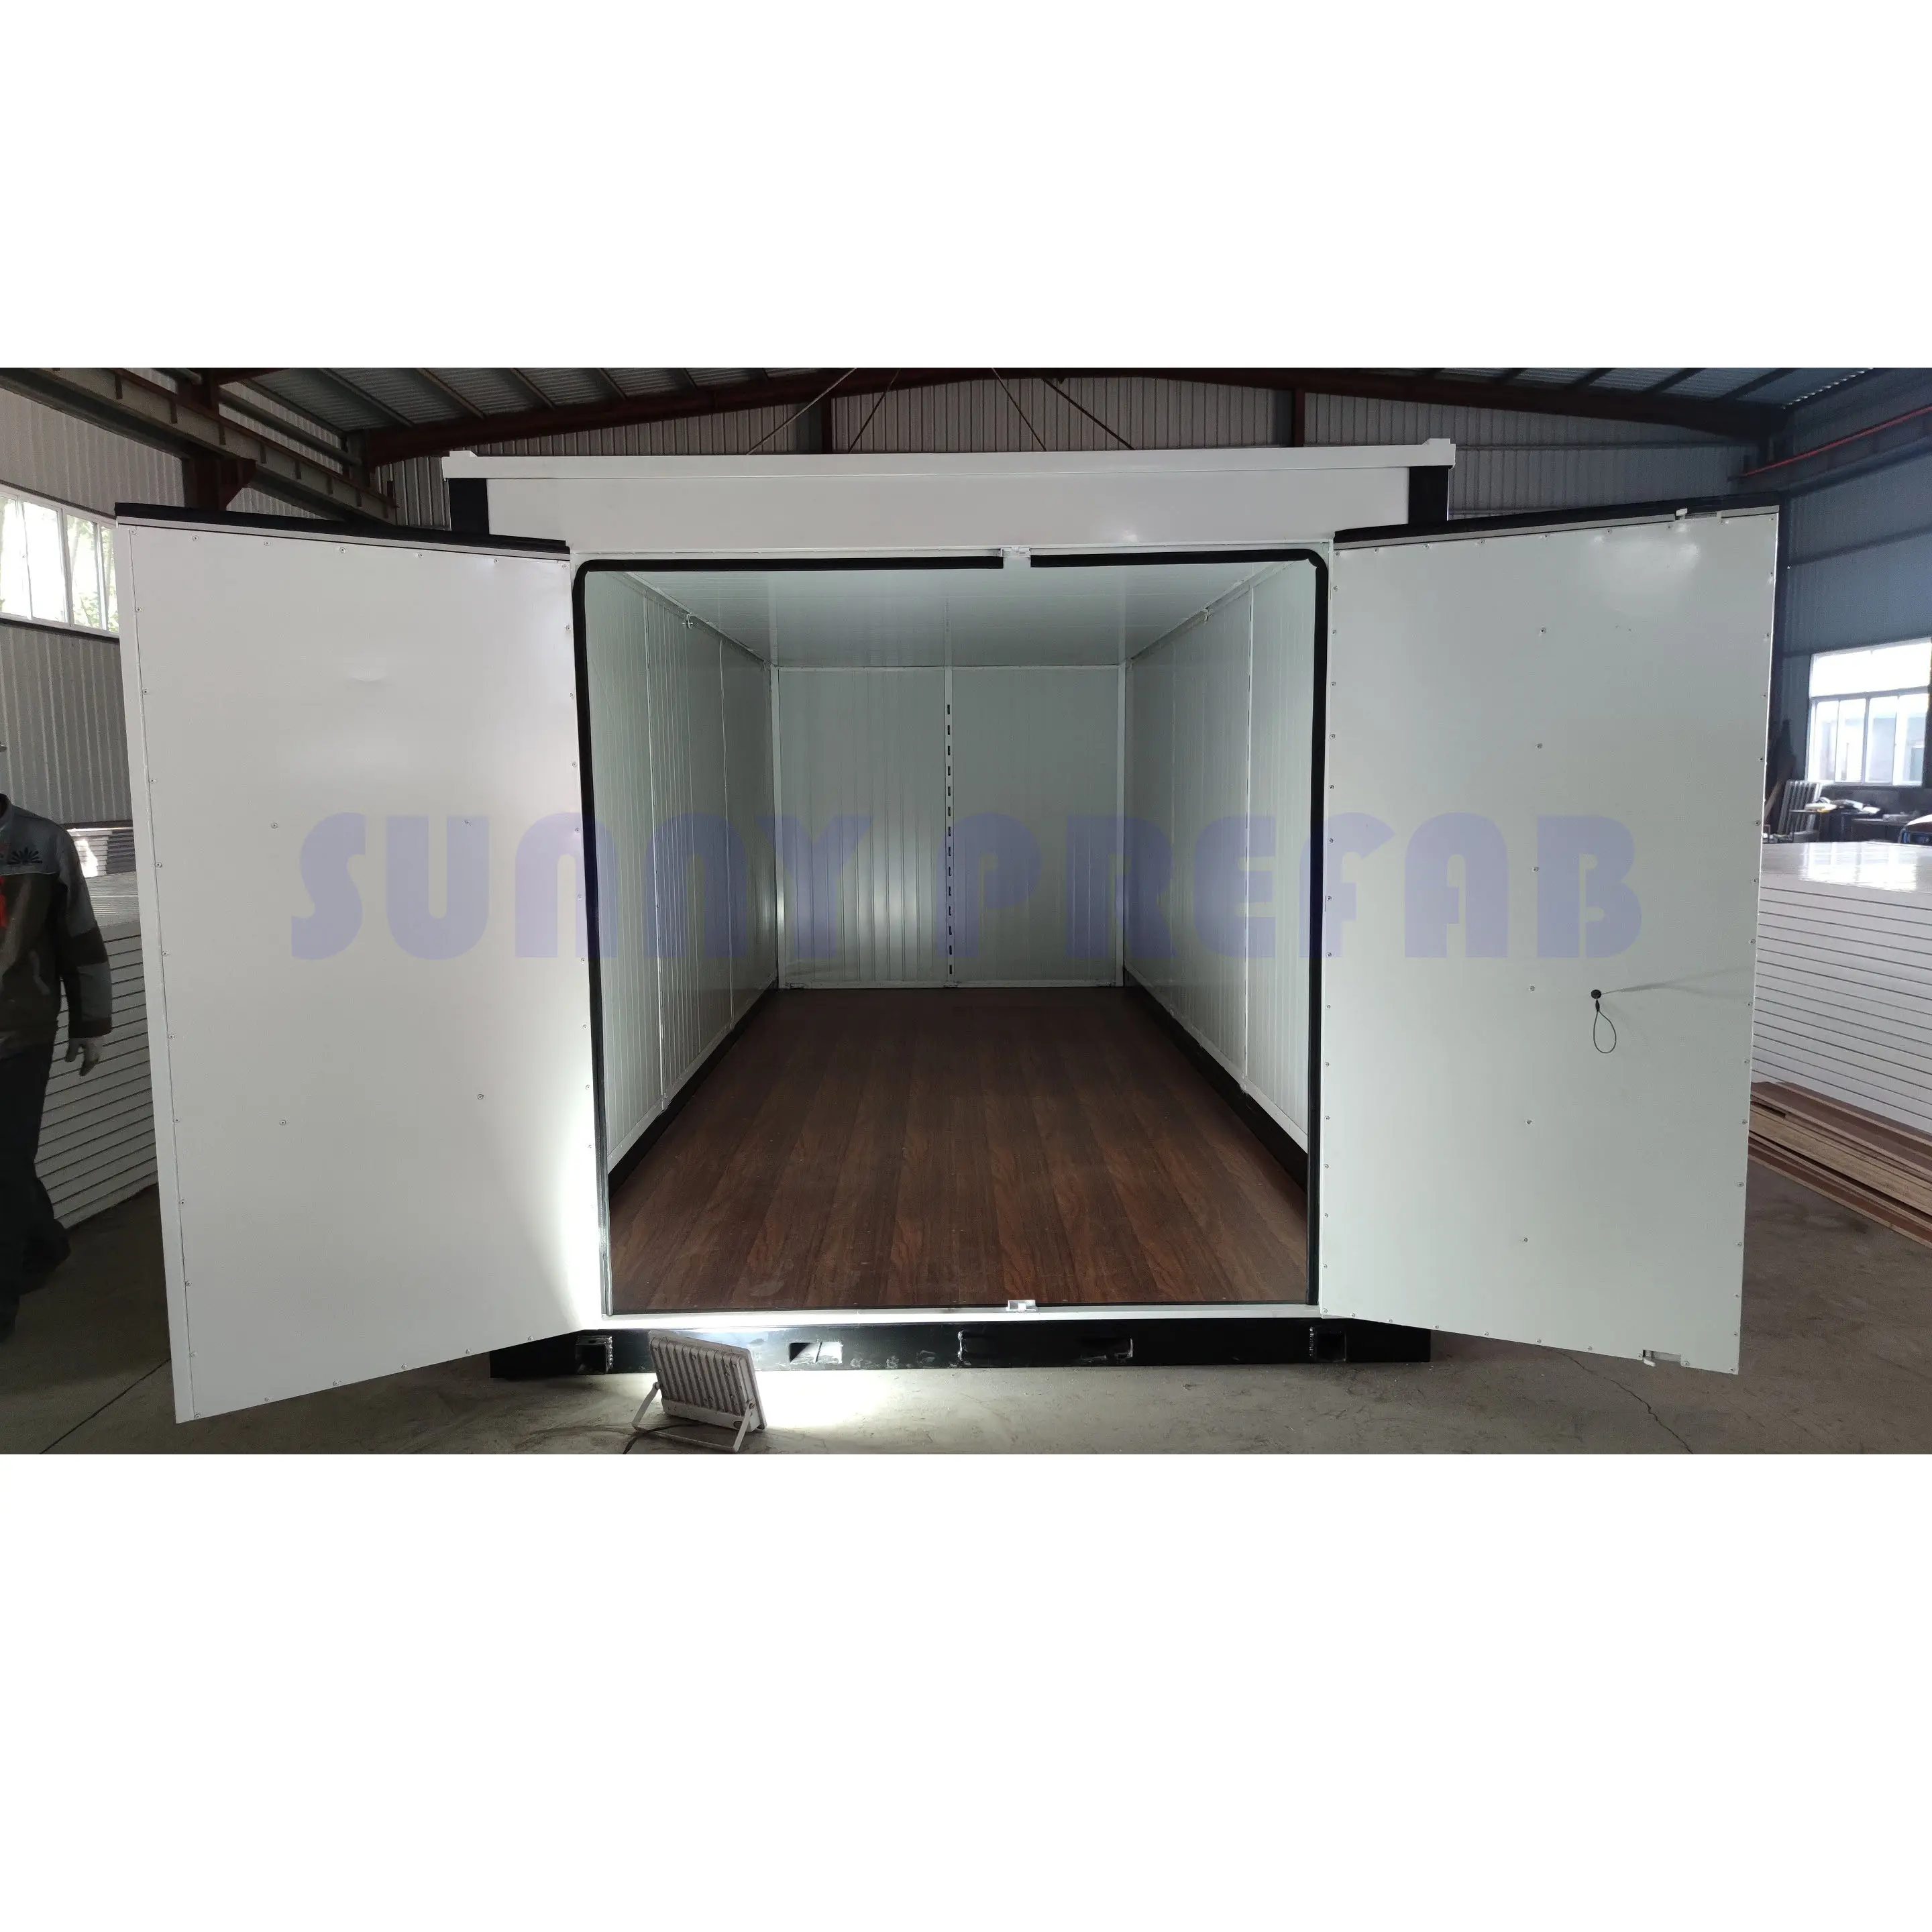 12' 16' 20' insulated steel prefab container storage self storage assemble foldable mobile container stackable portable storage